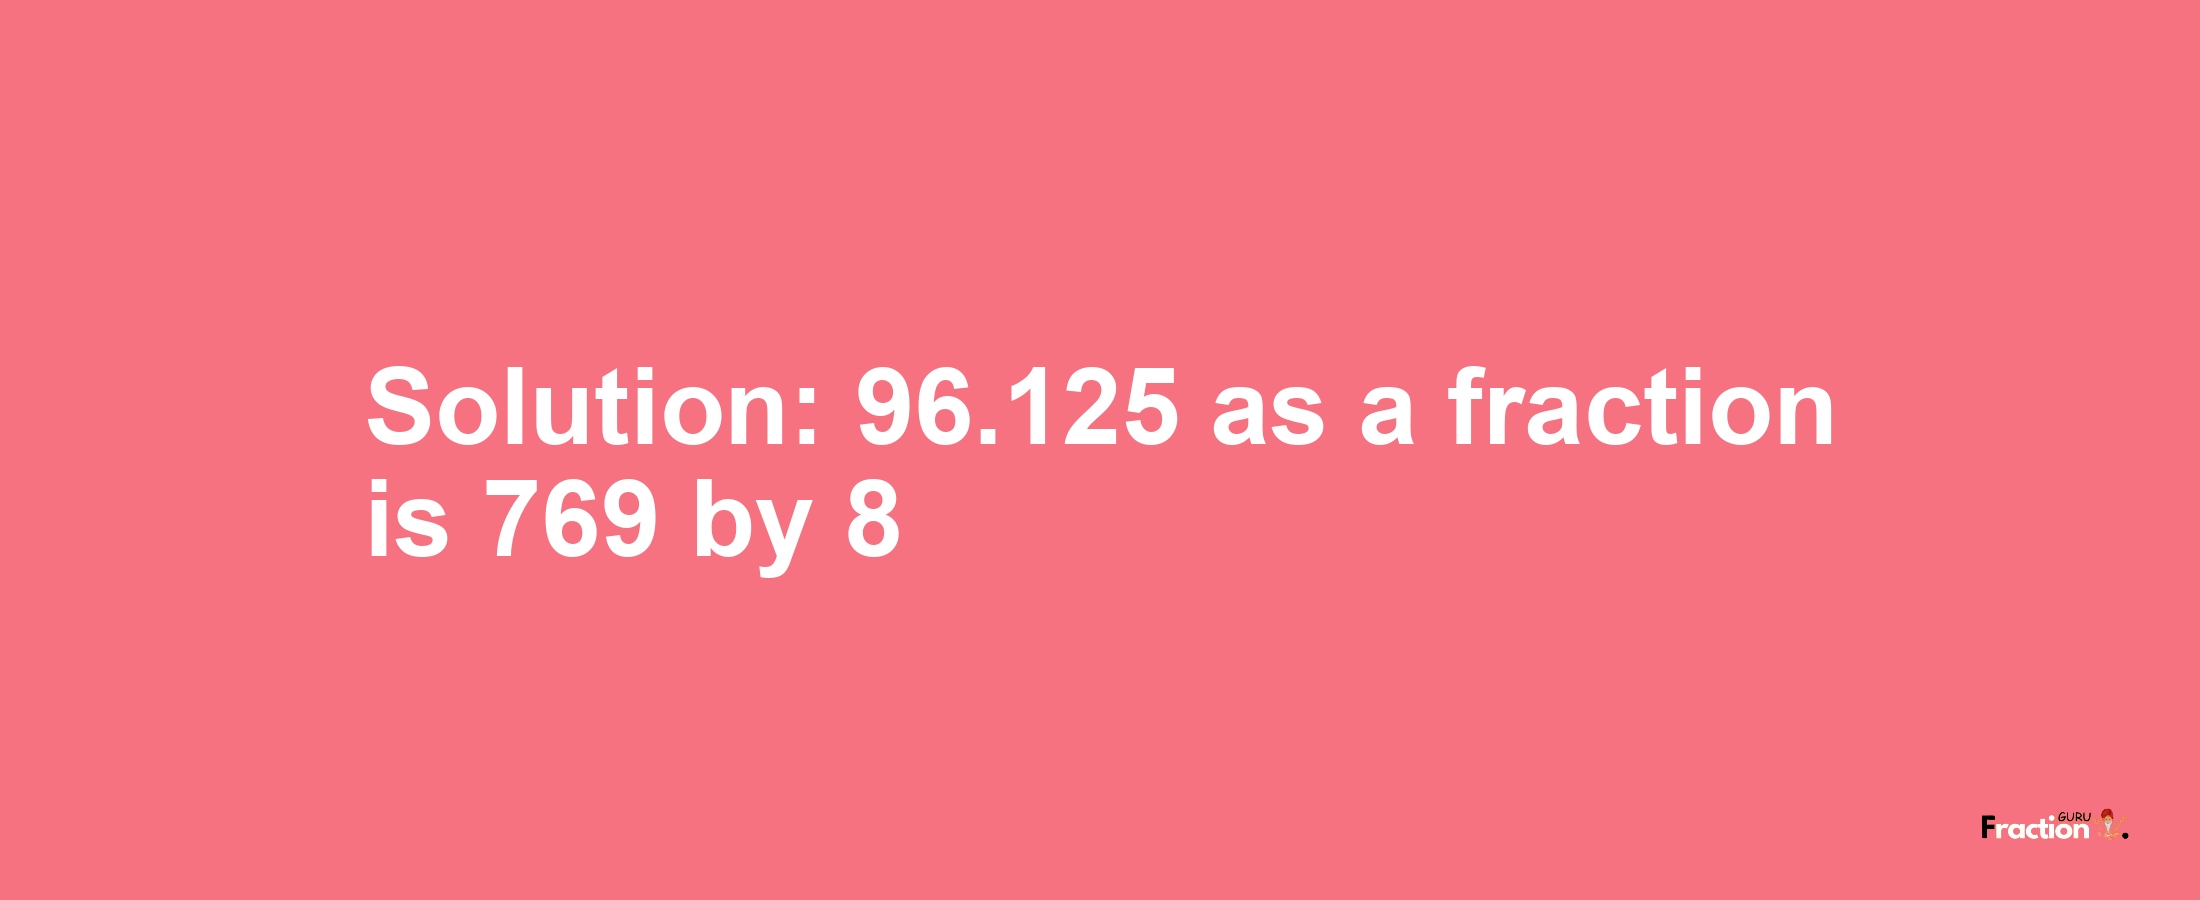 Solution:96.125 as a fraction is 769/8